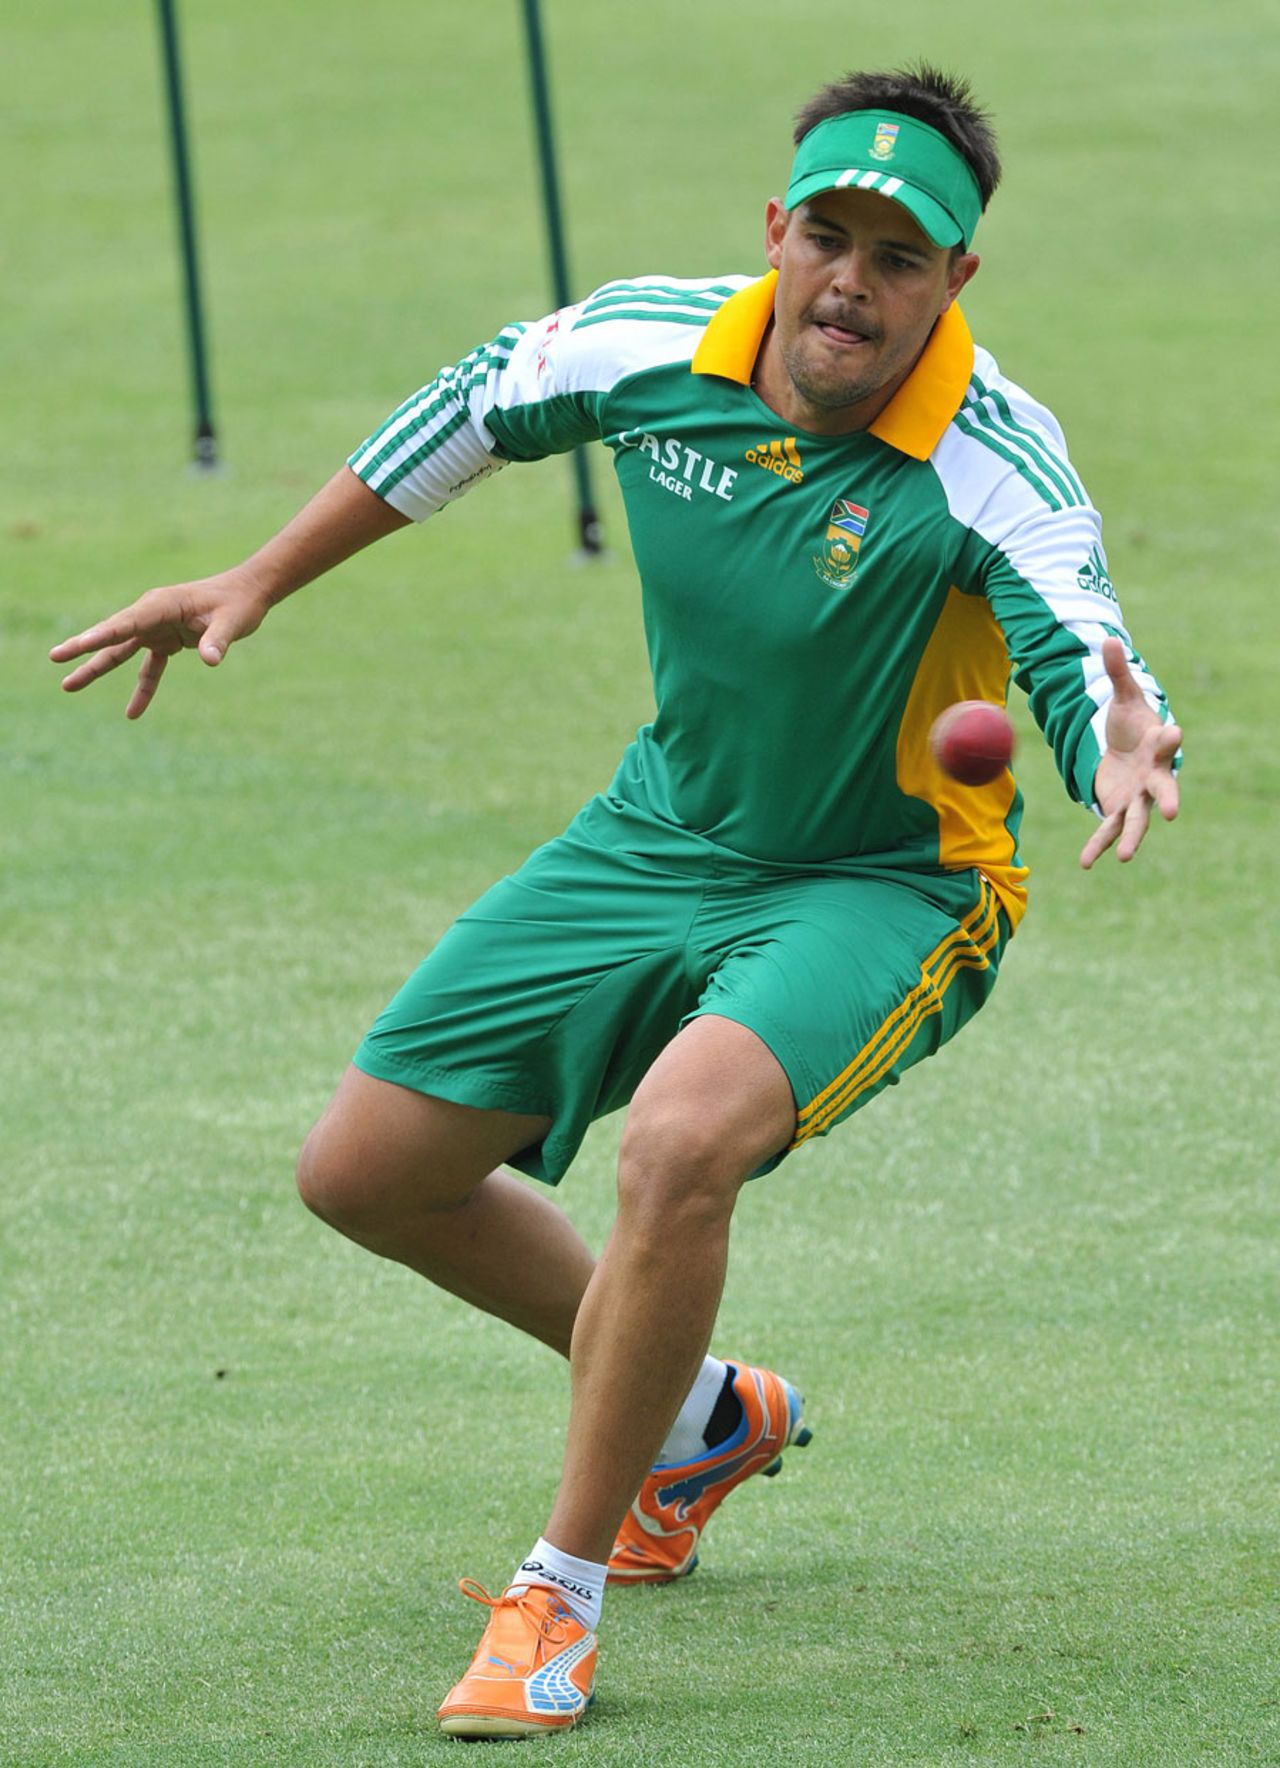 Jacques Rudolph tries to catch a ball during a fielding drill, Johannesburg, November 15, 2011